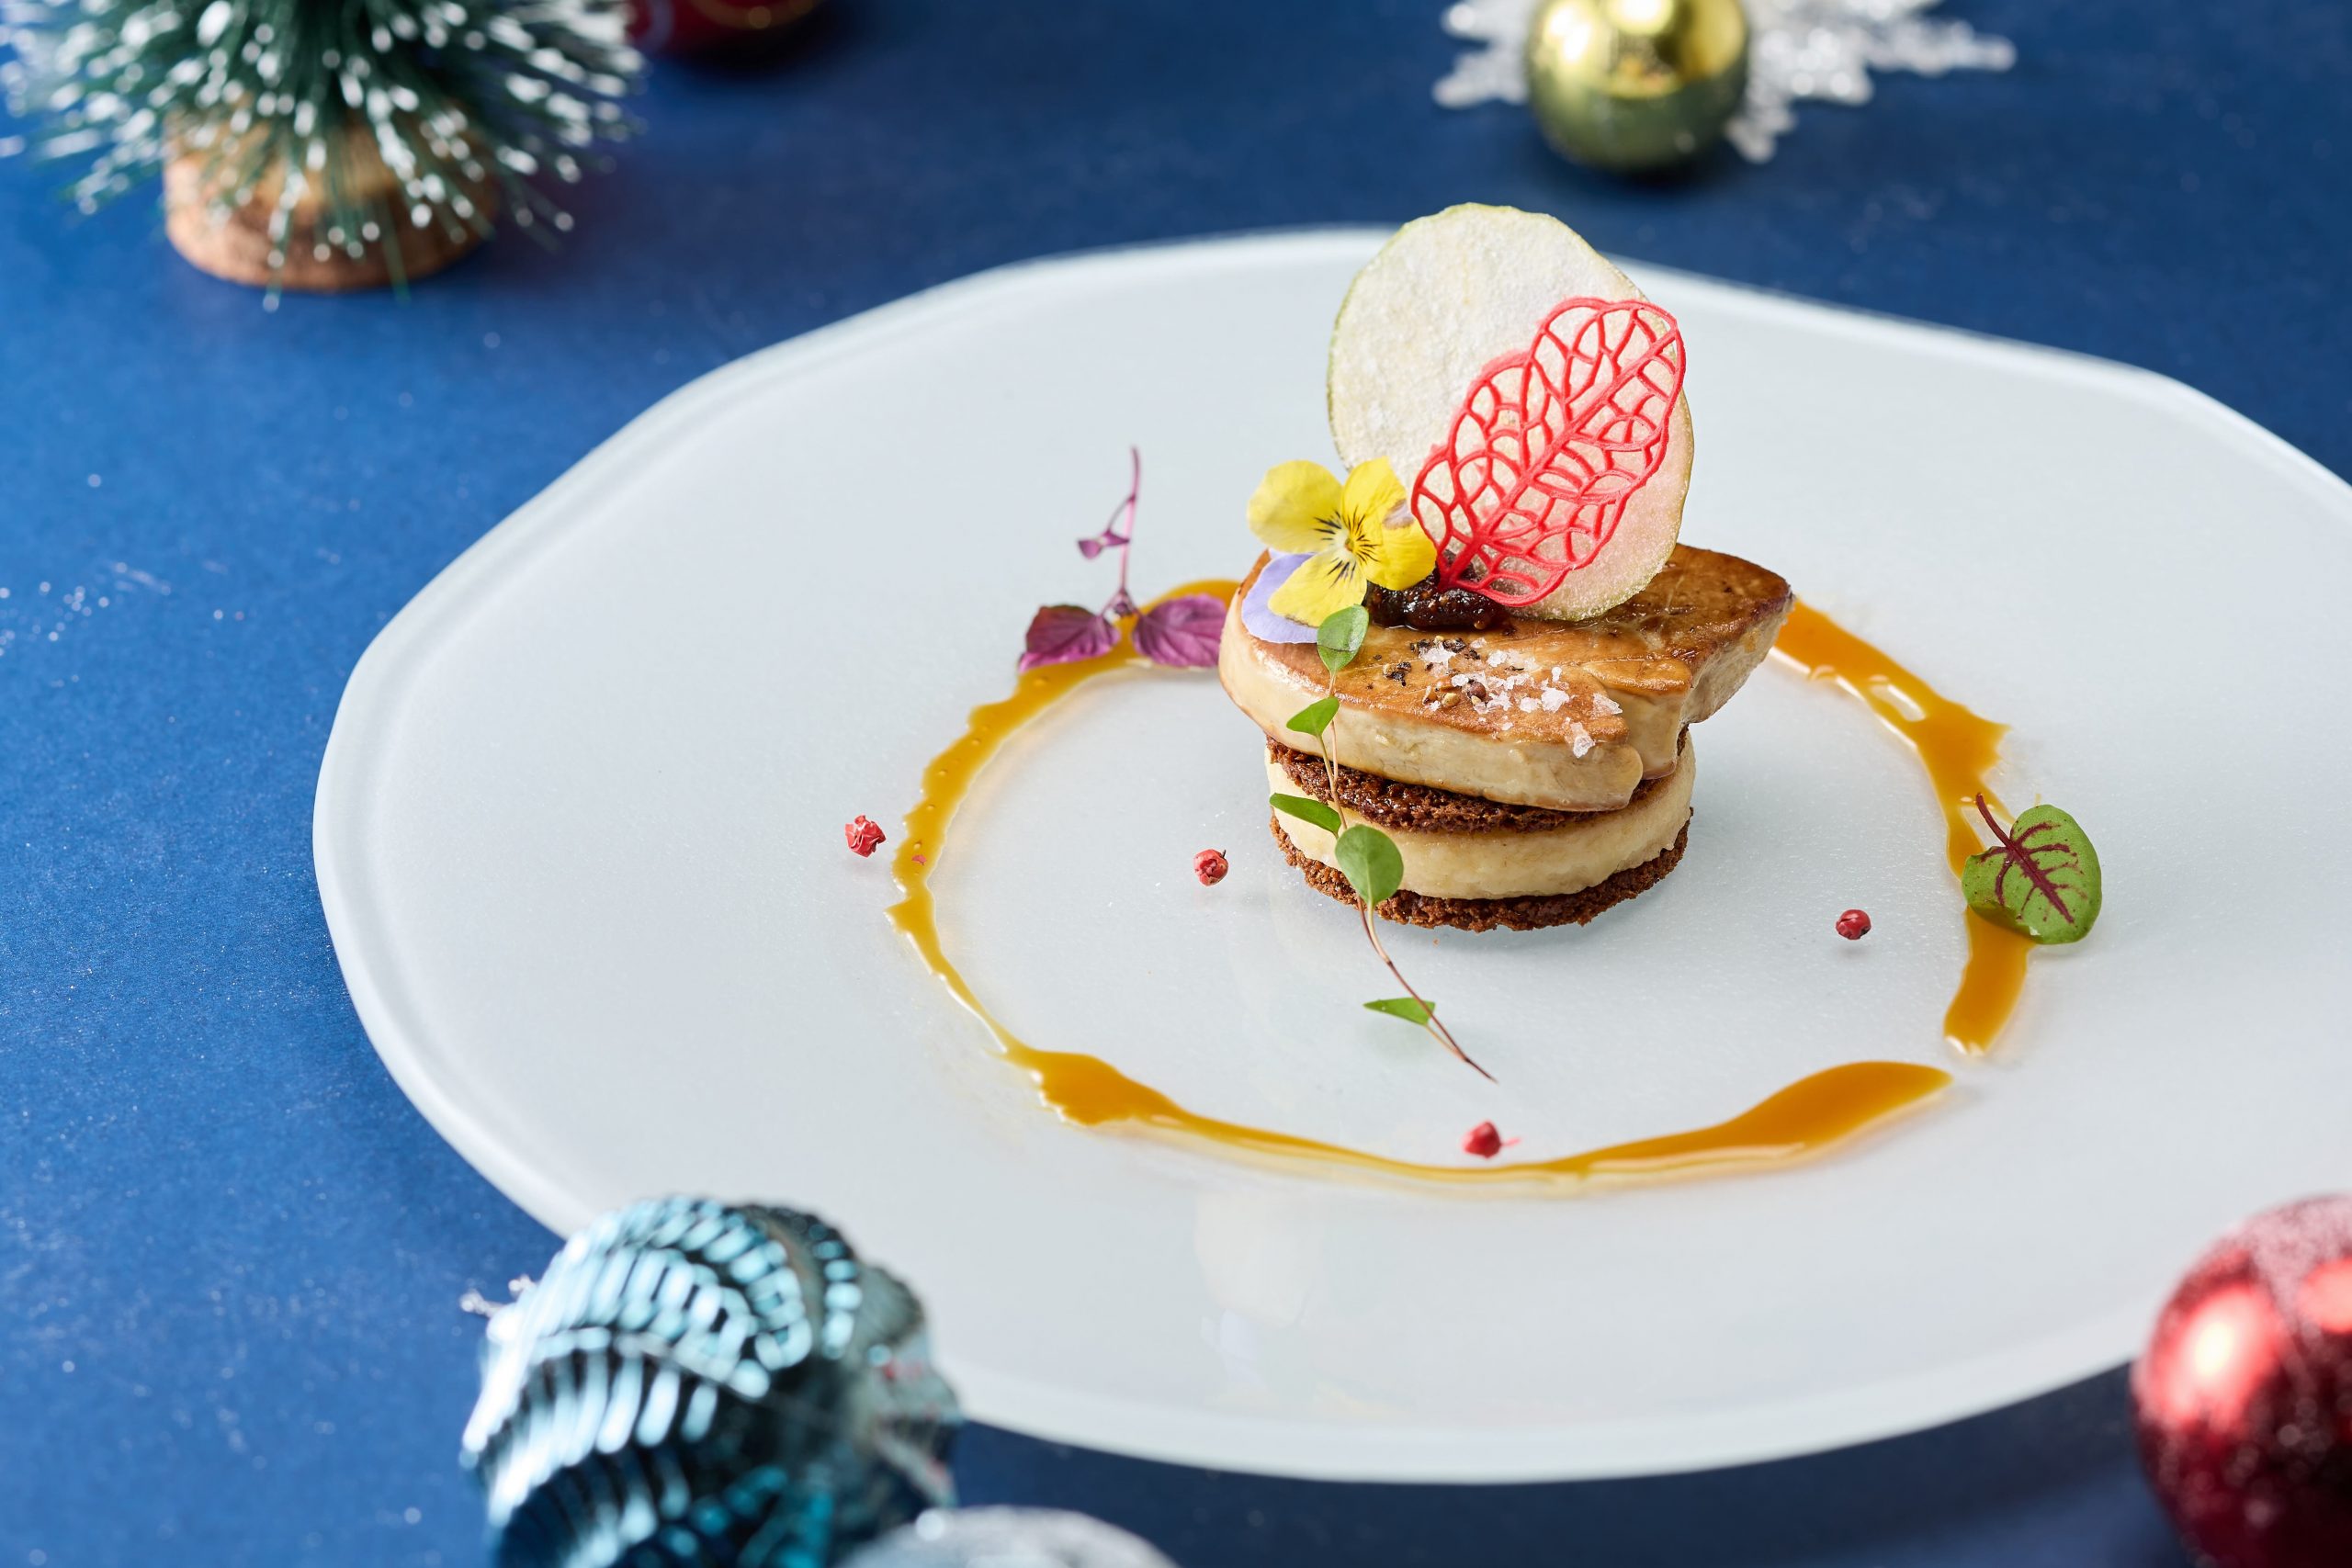 Savour foie gras sweetened with caramelised apples or drizzled in a punchy Grand Marnier caramel sauce at Brasserie this Christmas